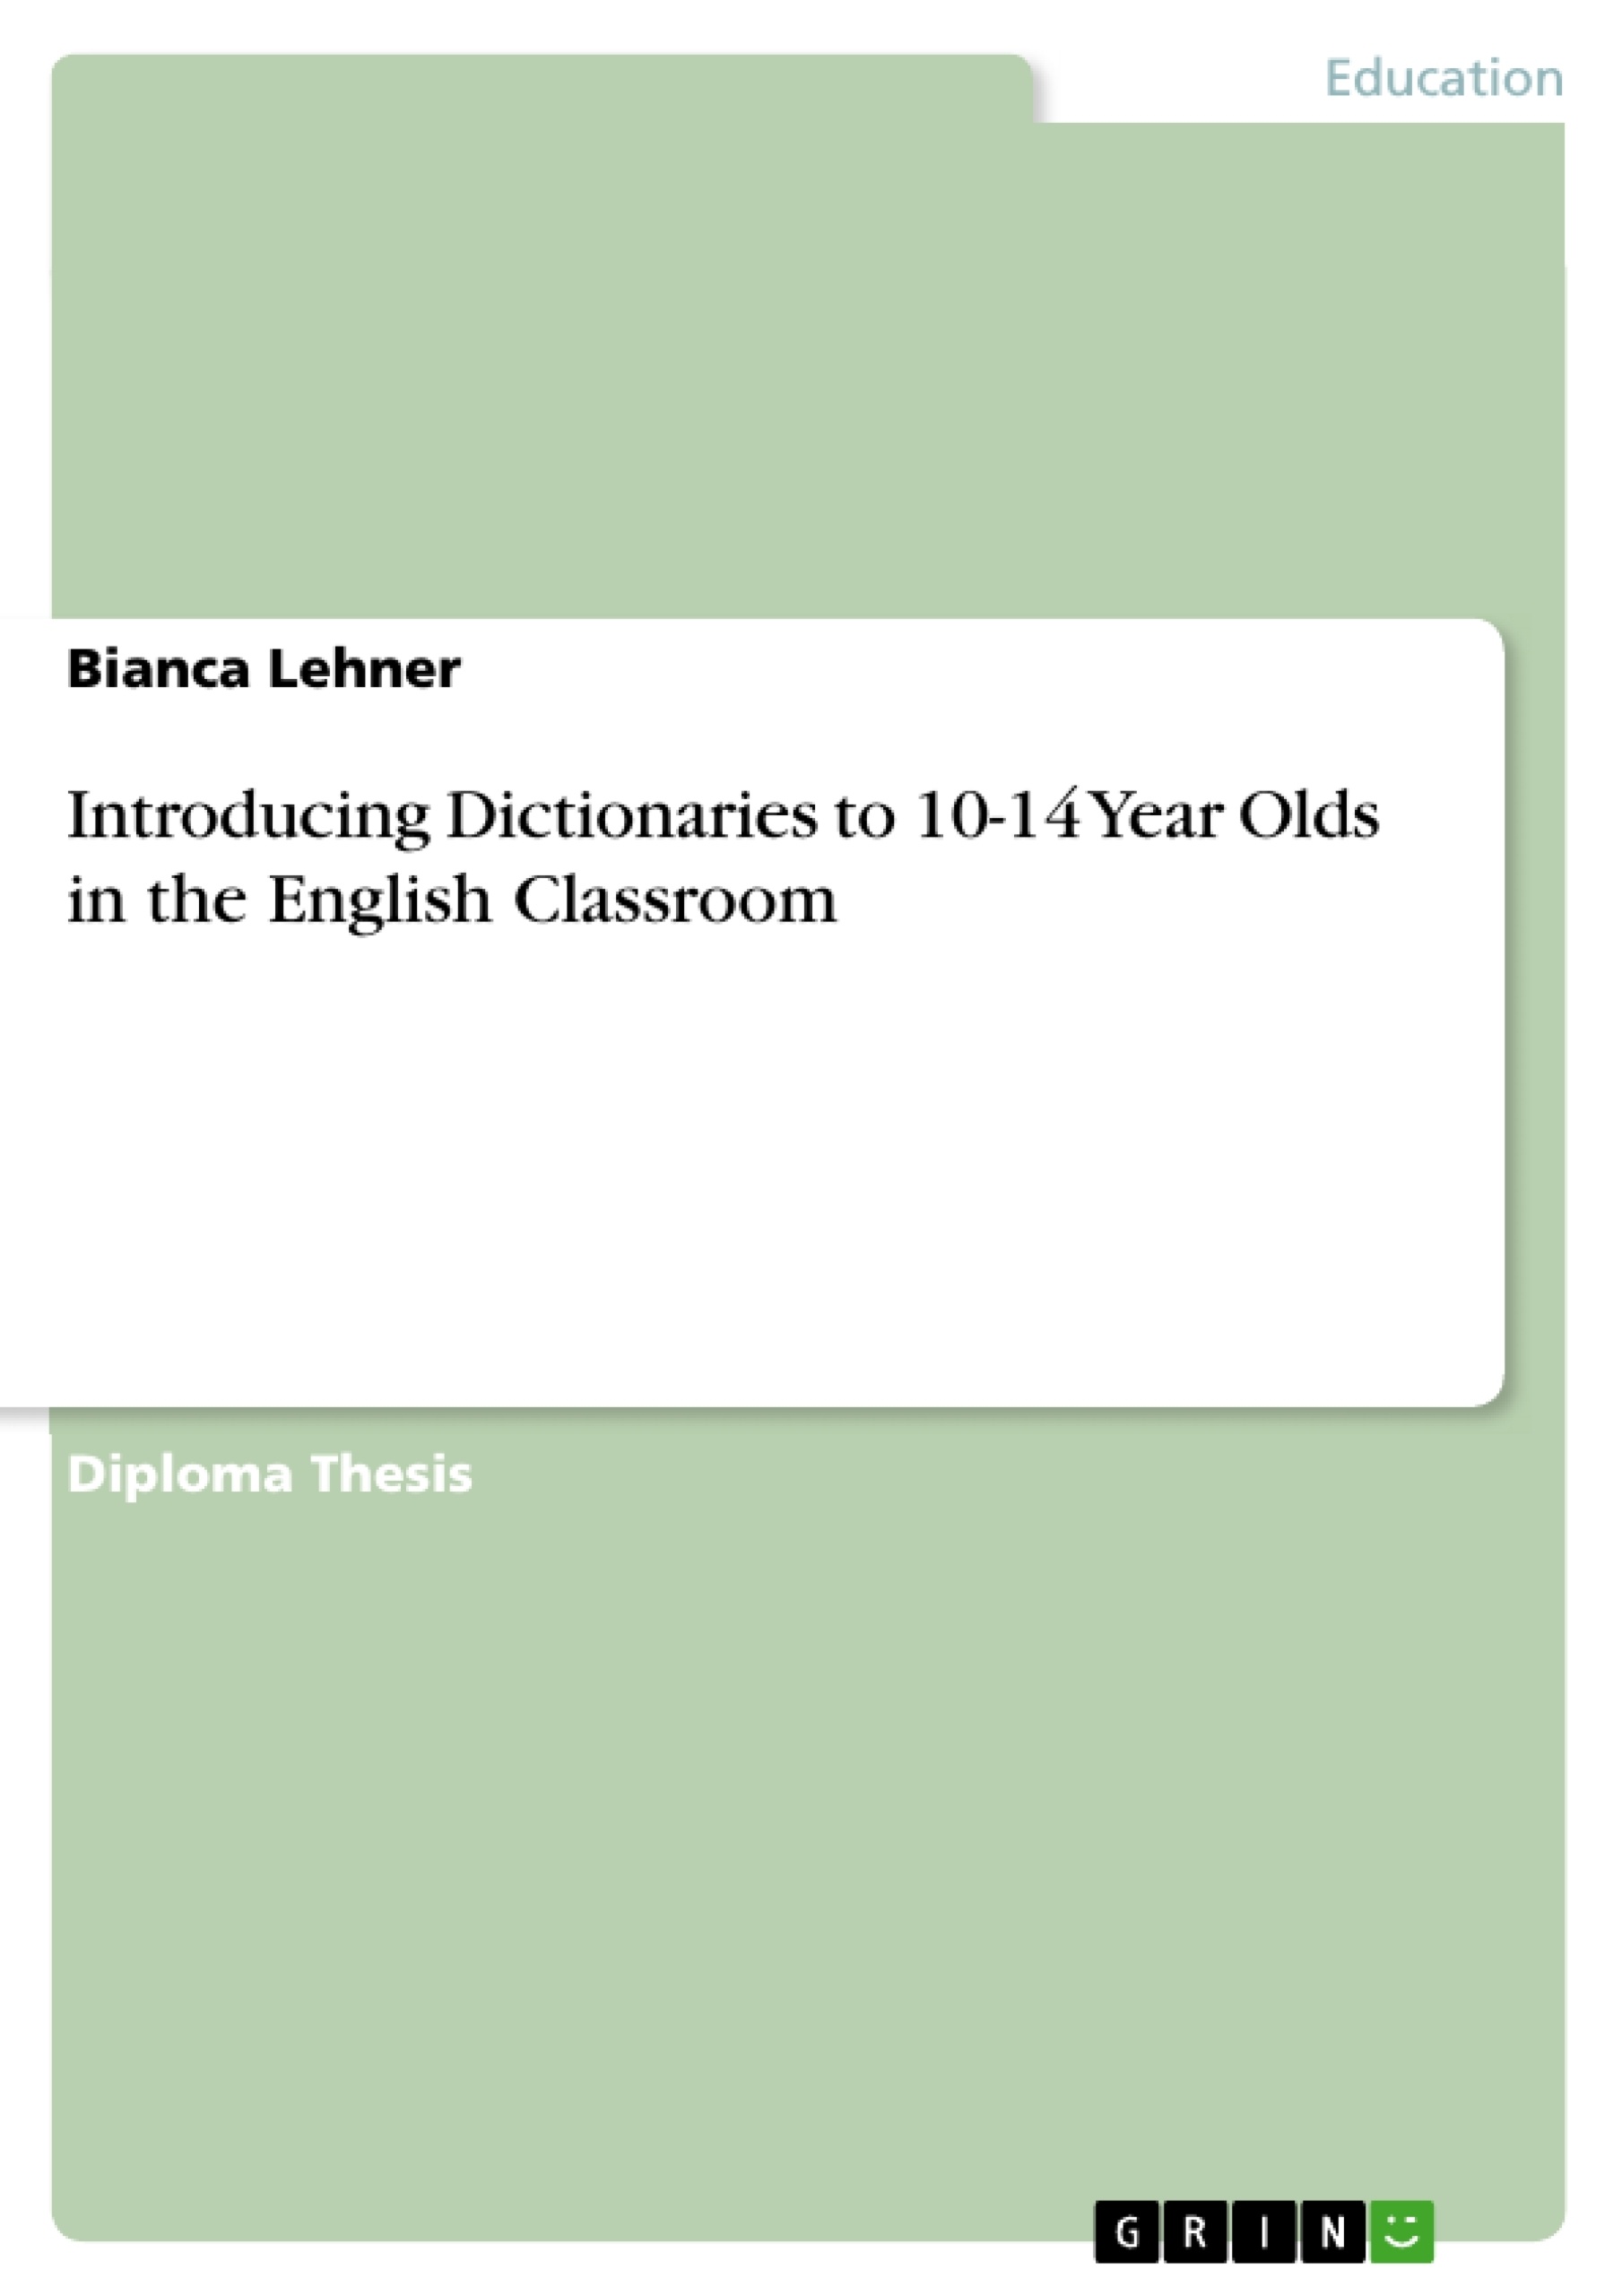 Title: Introducing Dictionaries to 10-14 Year Olds in the English Classroom